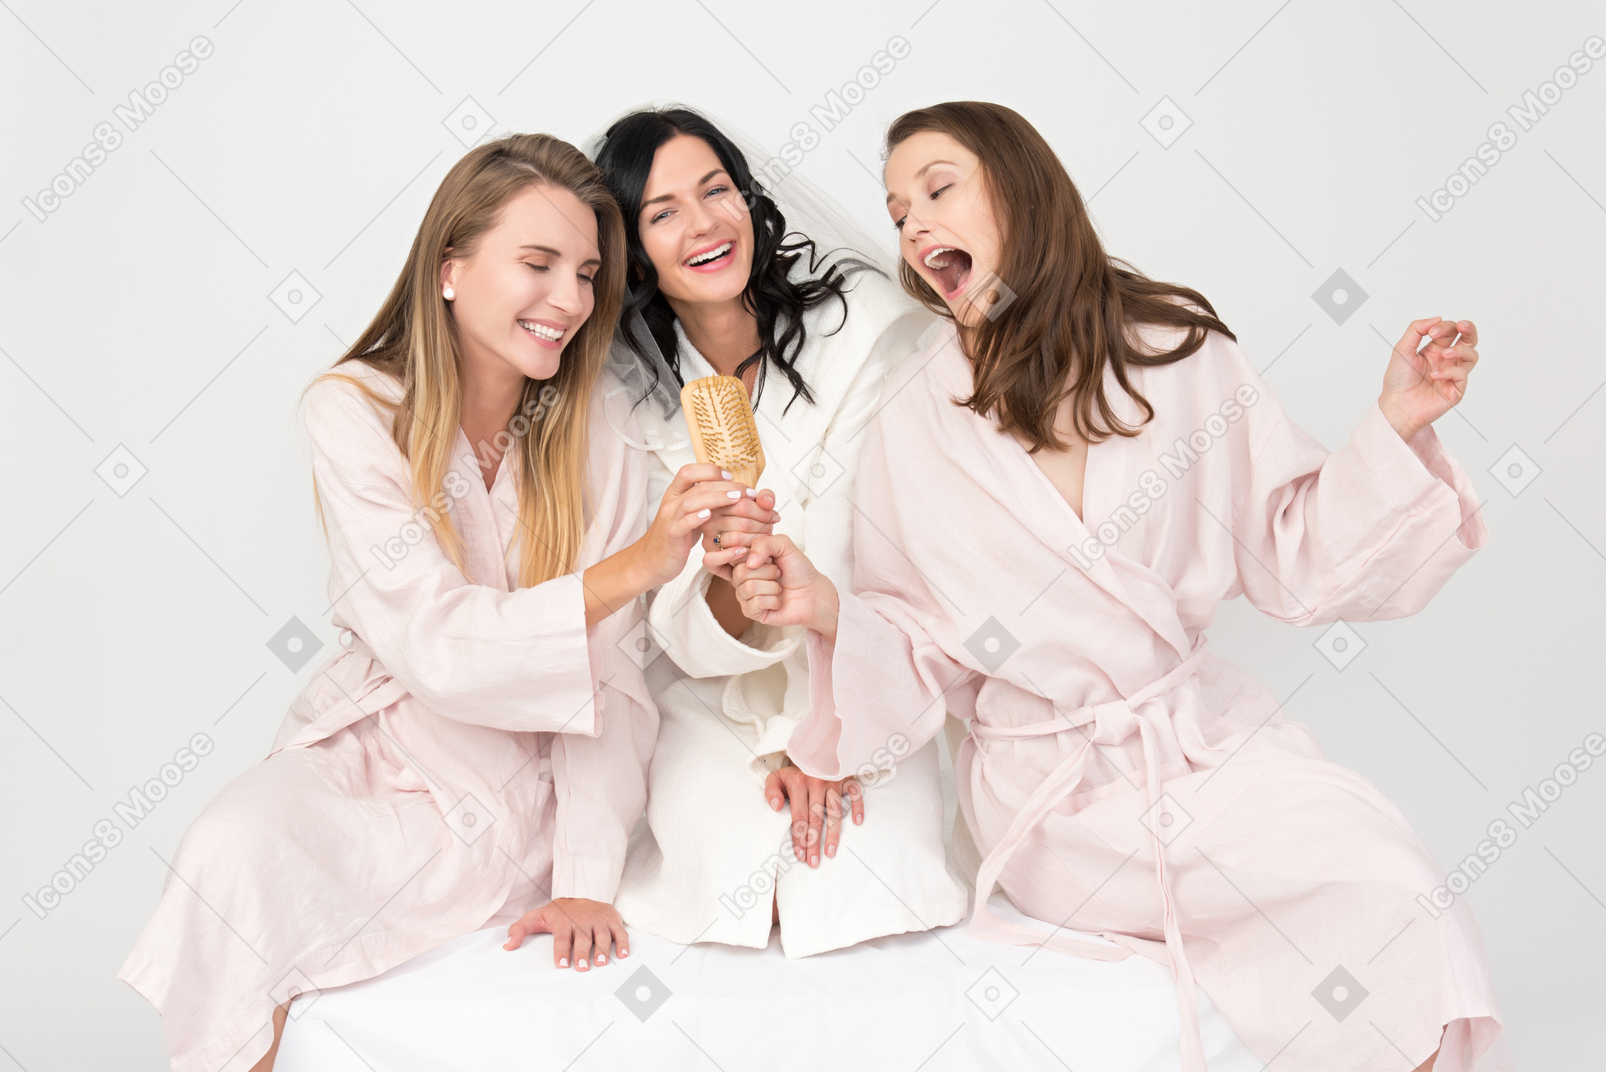 Bride and bridesmaids singing into a brush